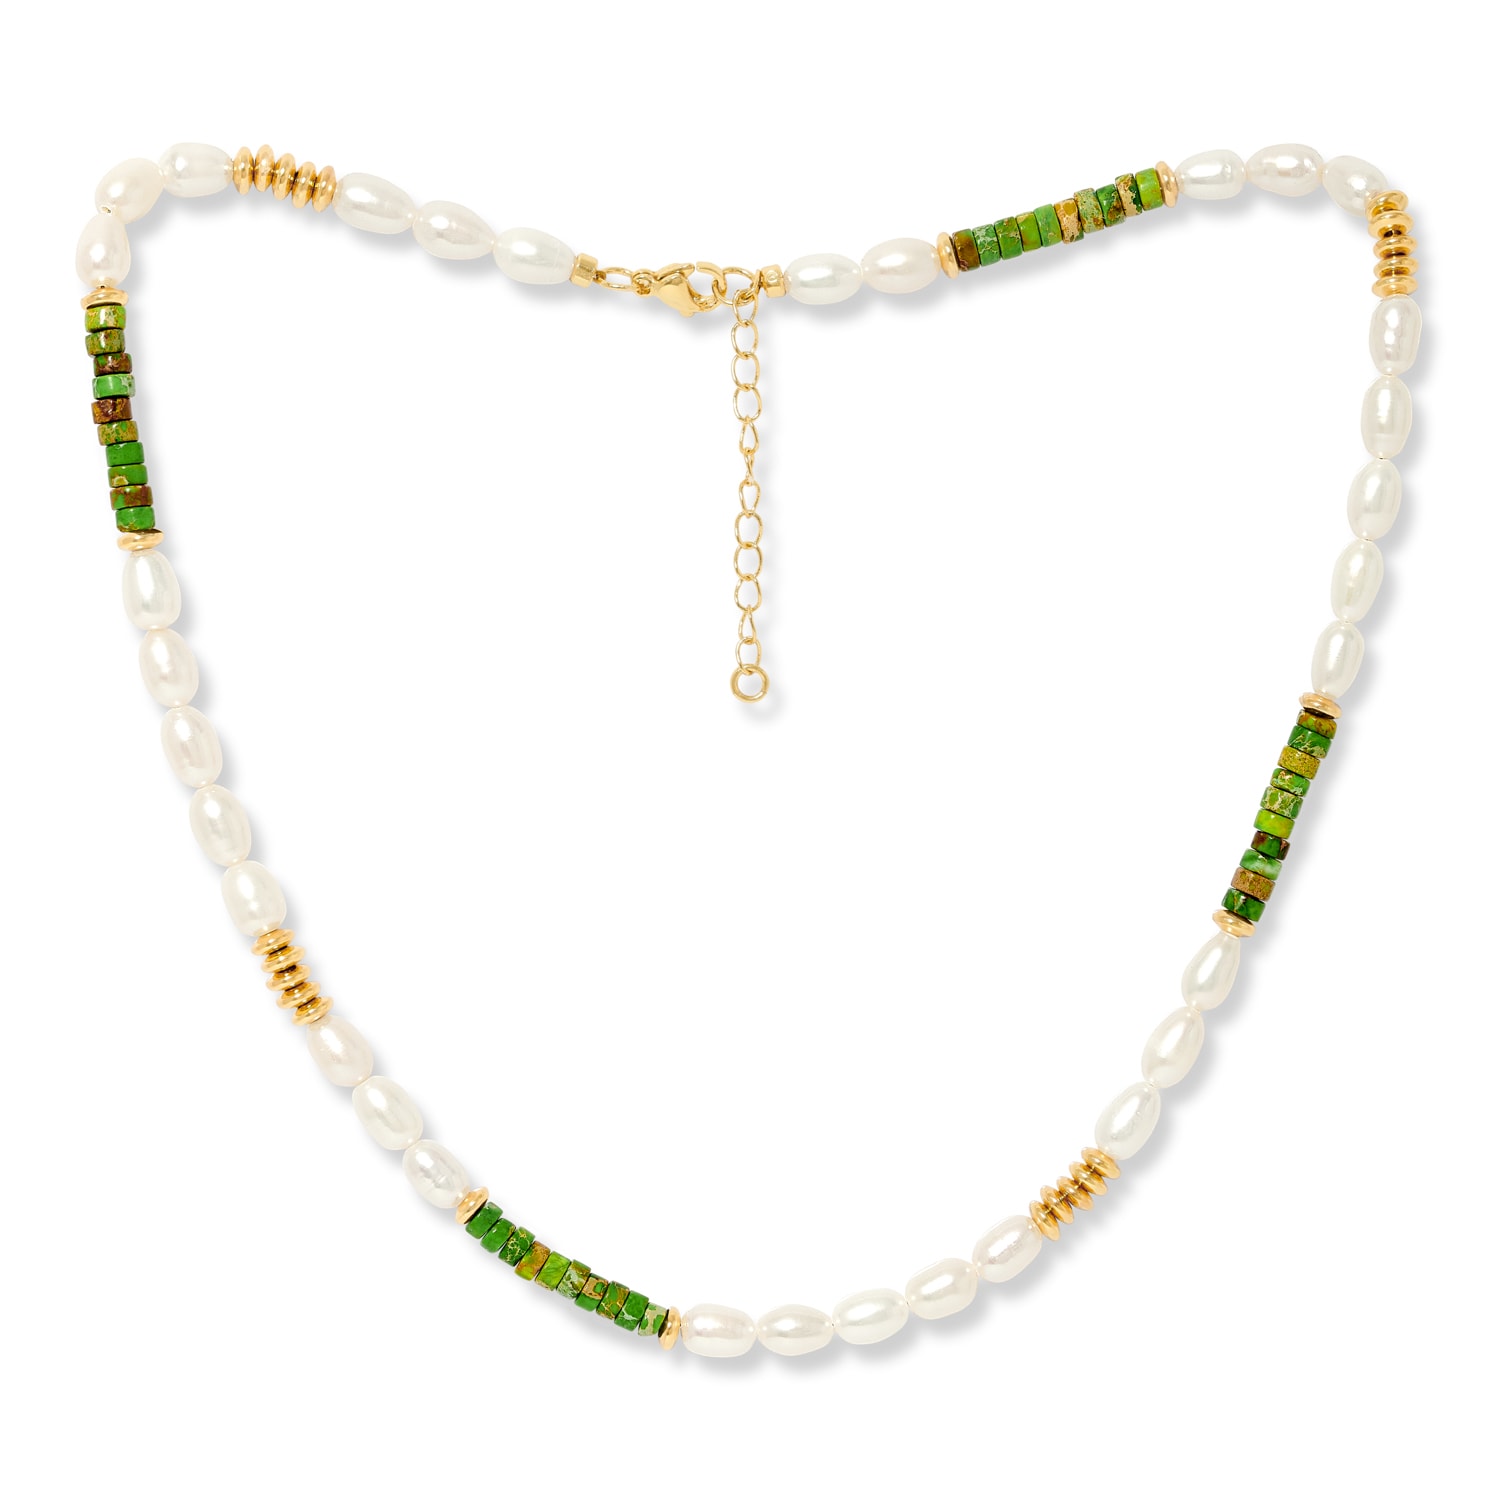 Women’s Gold / Green / White Nova Oval Cultured Freshwater Pearls Necklace With Green Jasper & Gold Beads Pearls of the Orient Online